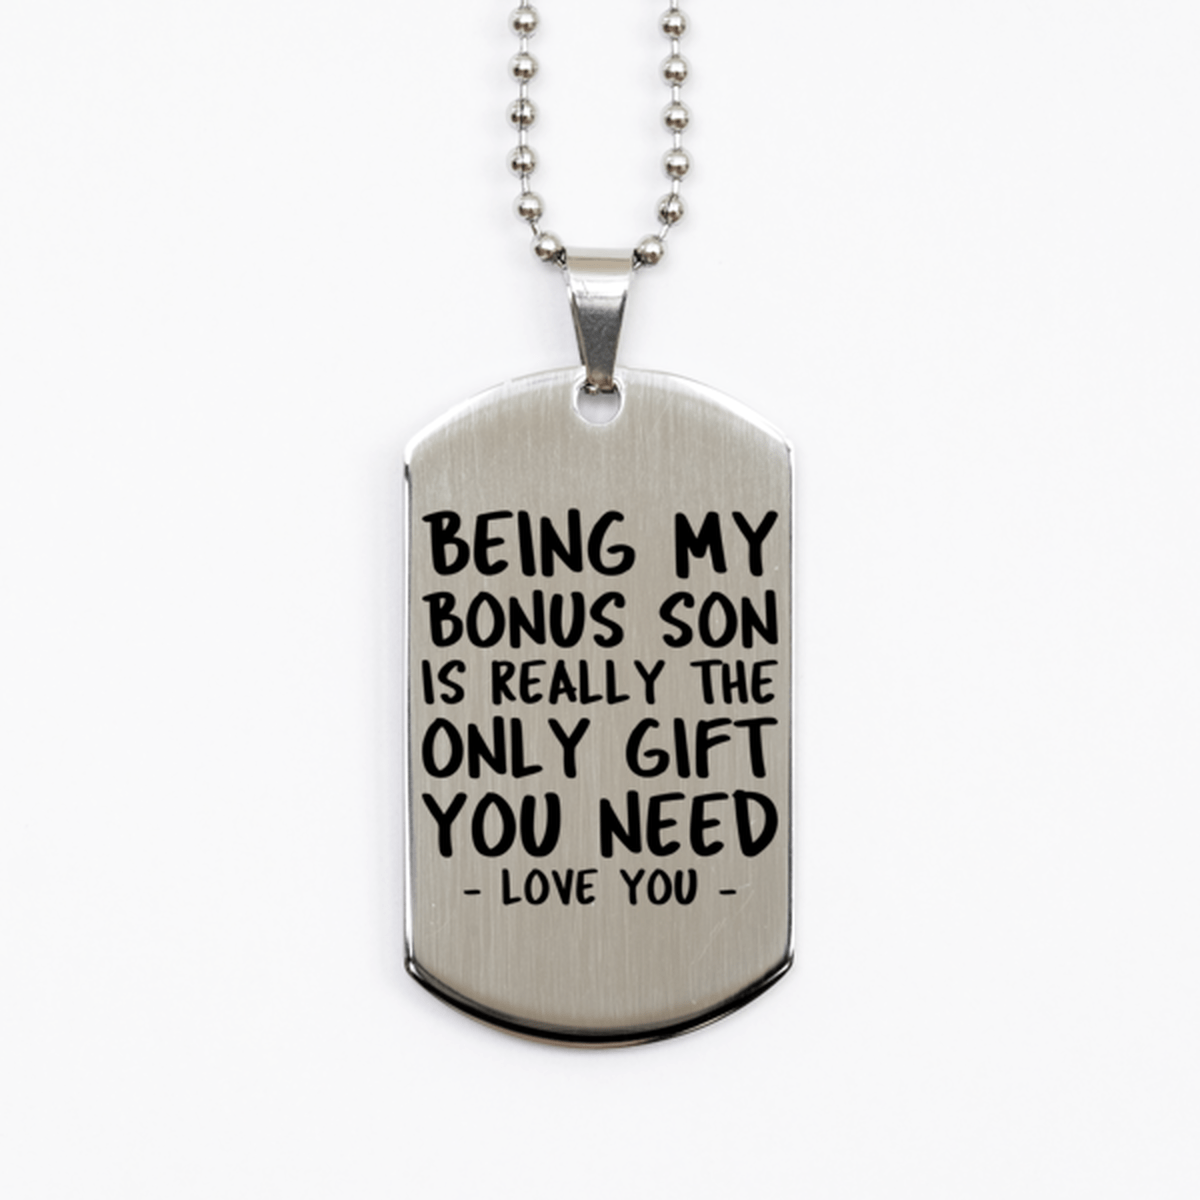 Funny Bonus Son Silver Dog Tag Necklace, Being My Bonus Son Is Really the Only Gift You Need, Best Birthday Gifts for Bonus Son